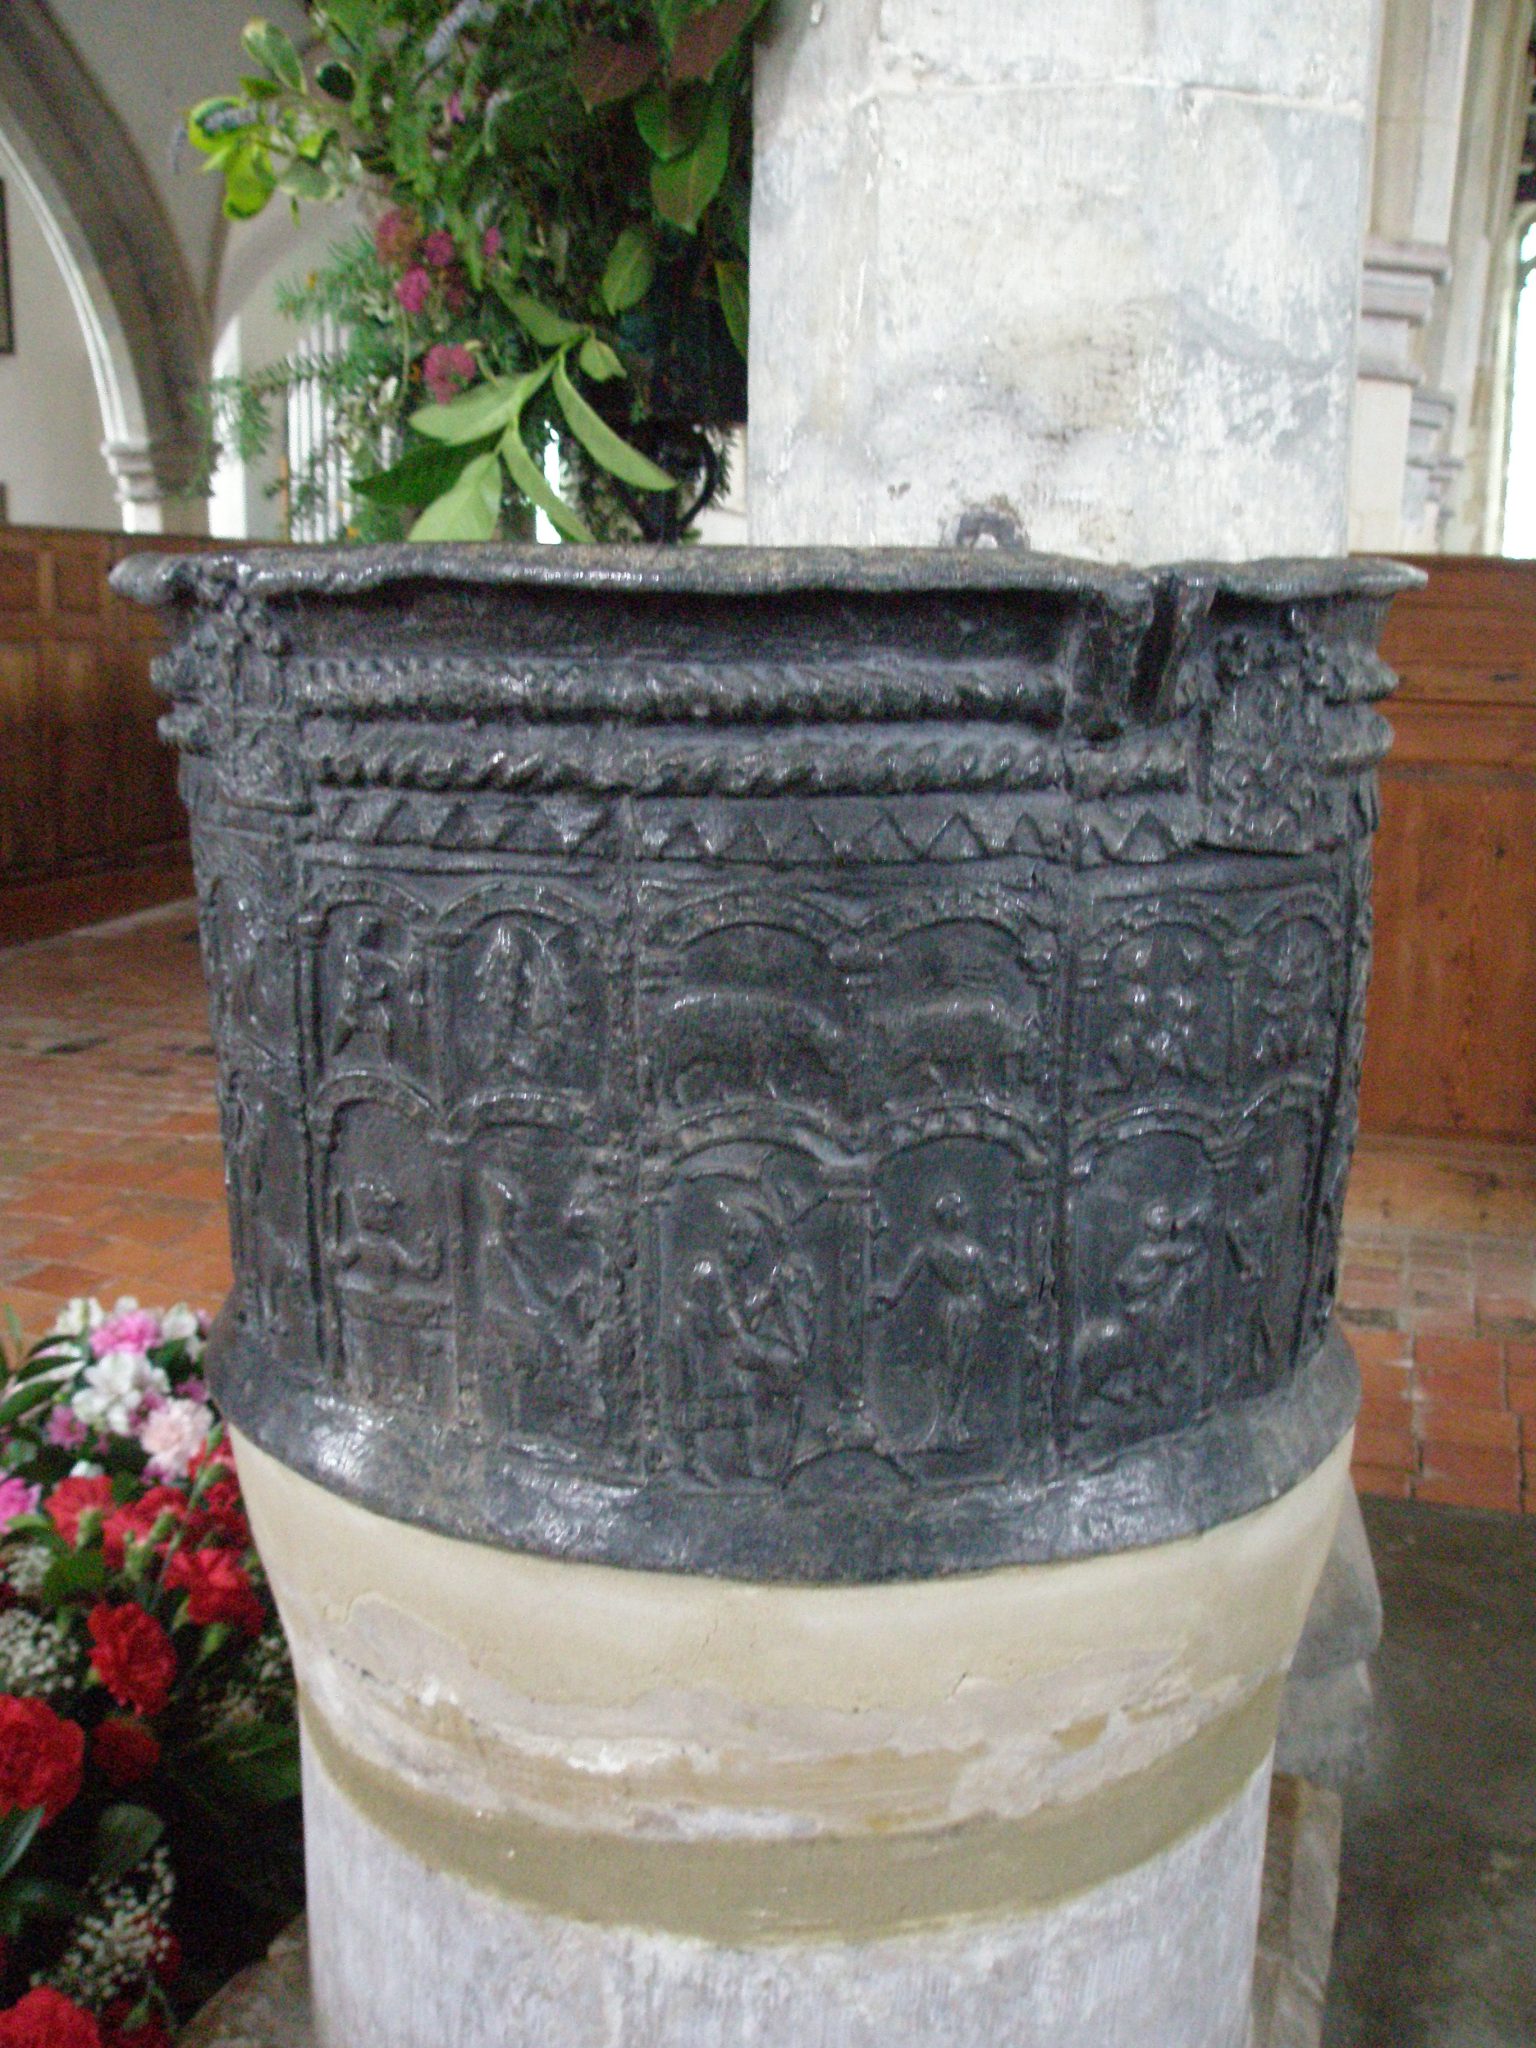 The Font is decorated with 12 panels showing the signs of the Zodiac, which are accompanied by images of the typical labors of each month.